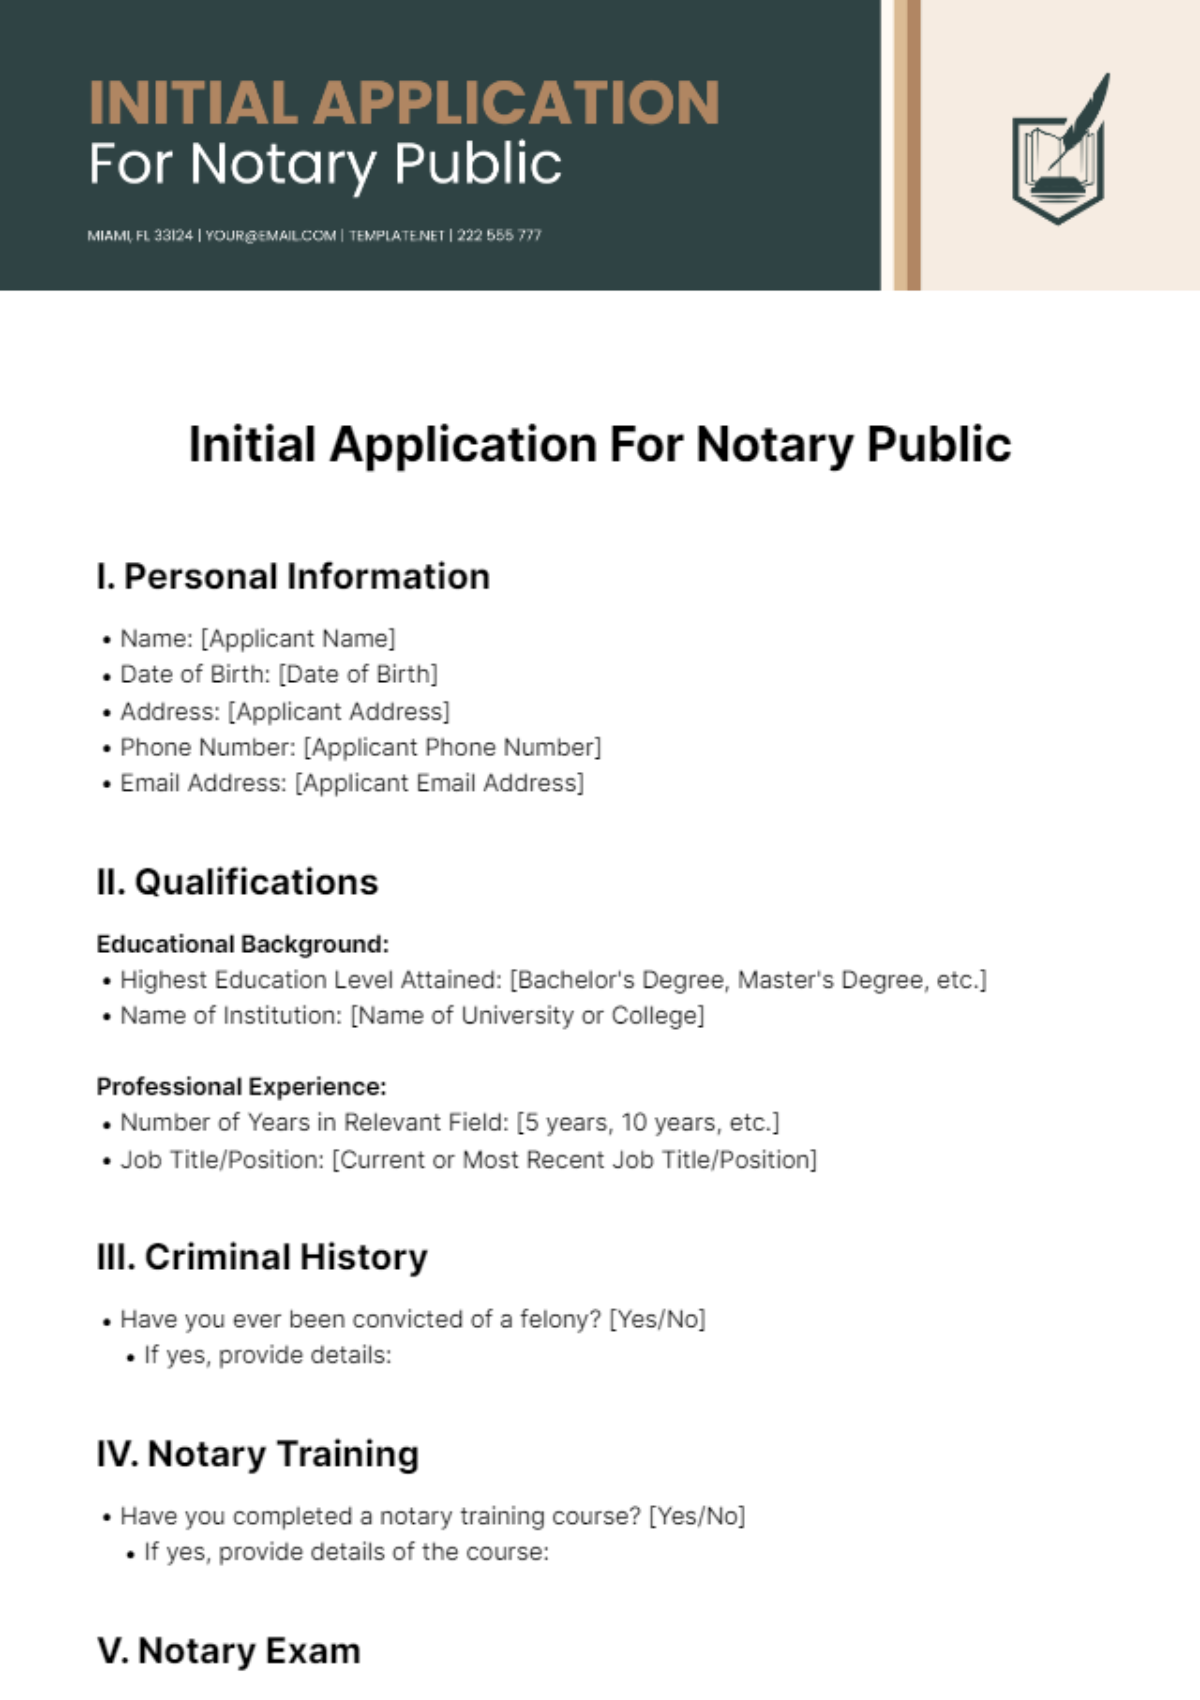 Initial Application For Notary Public Template